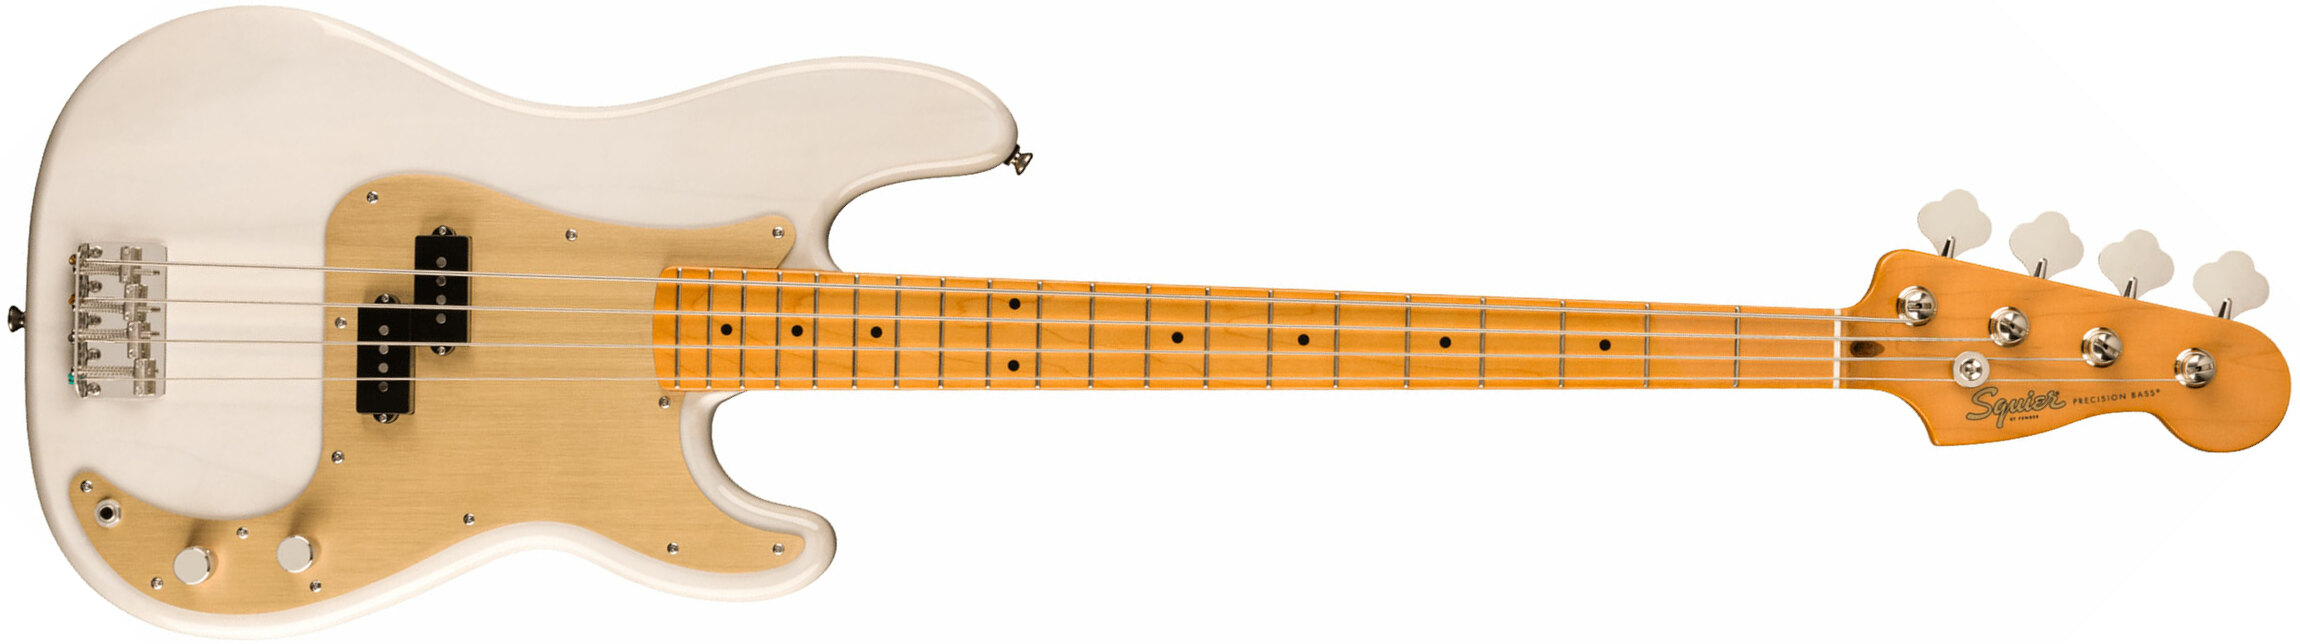 Squier Precision Bass Late '50s Classic Vibe Fsr Ltd Mn - White Blonde - Solid body electric bass - Main picture